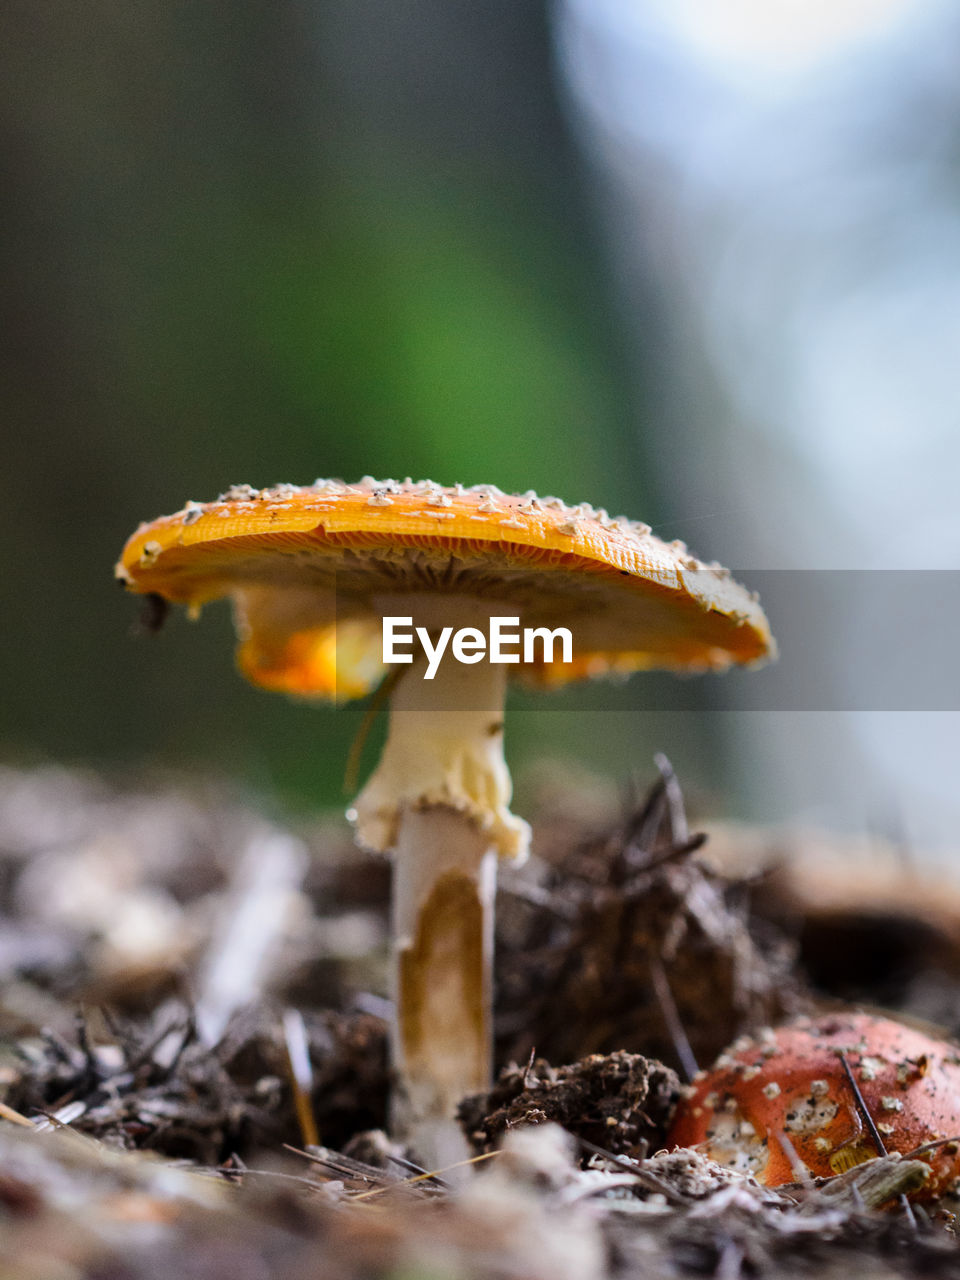 CLOSE-UP OF FLY AGARIC MUSHROOM IN BACKGROUND